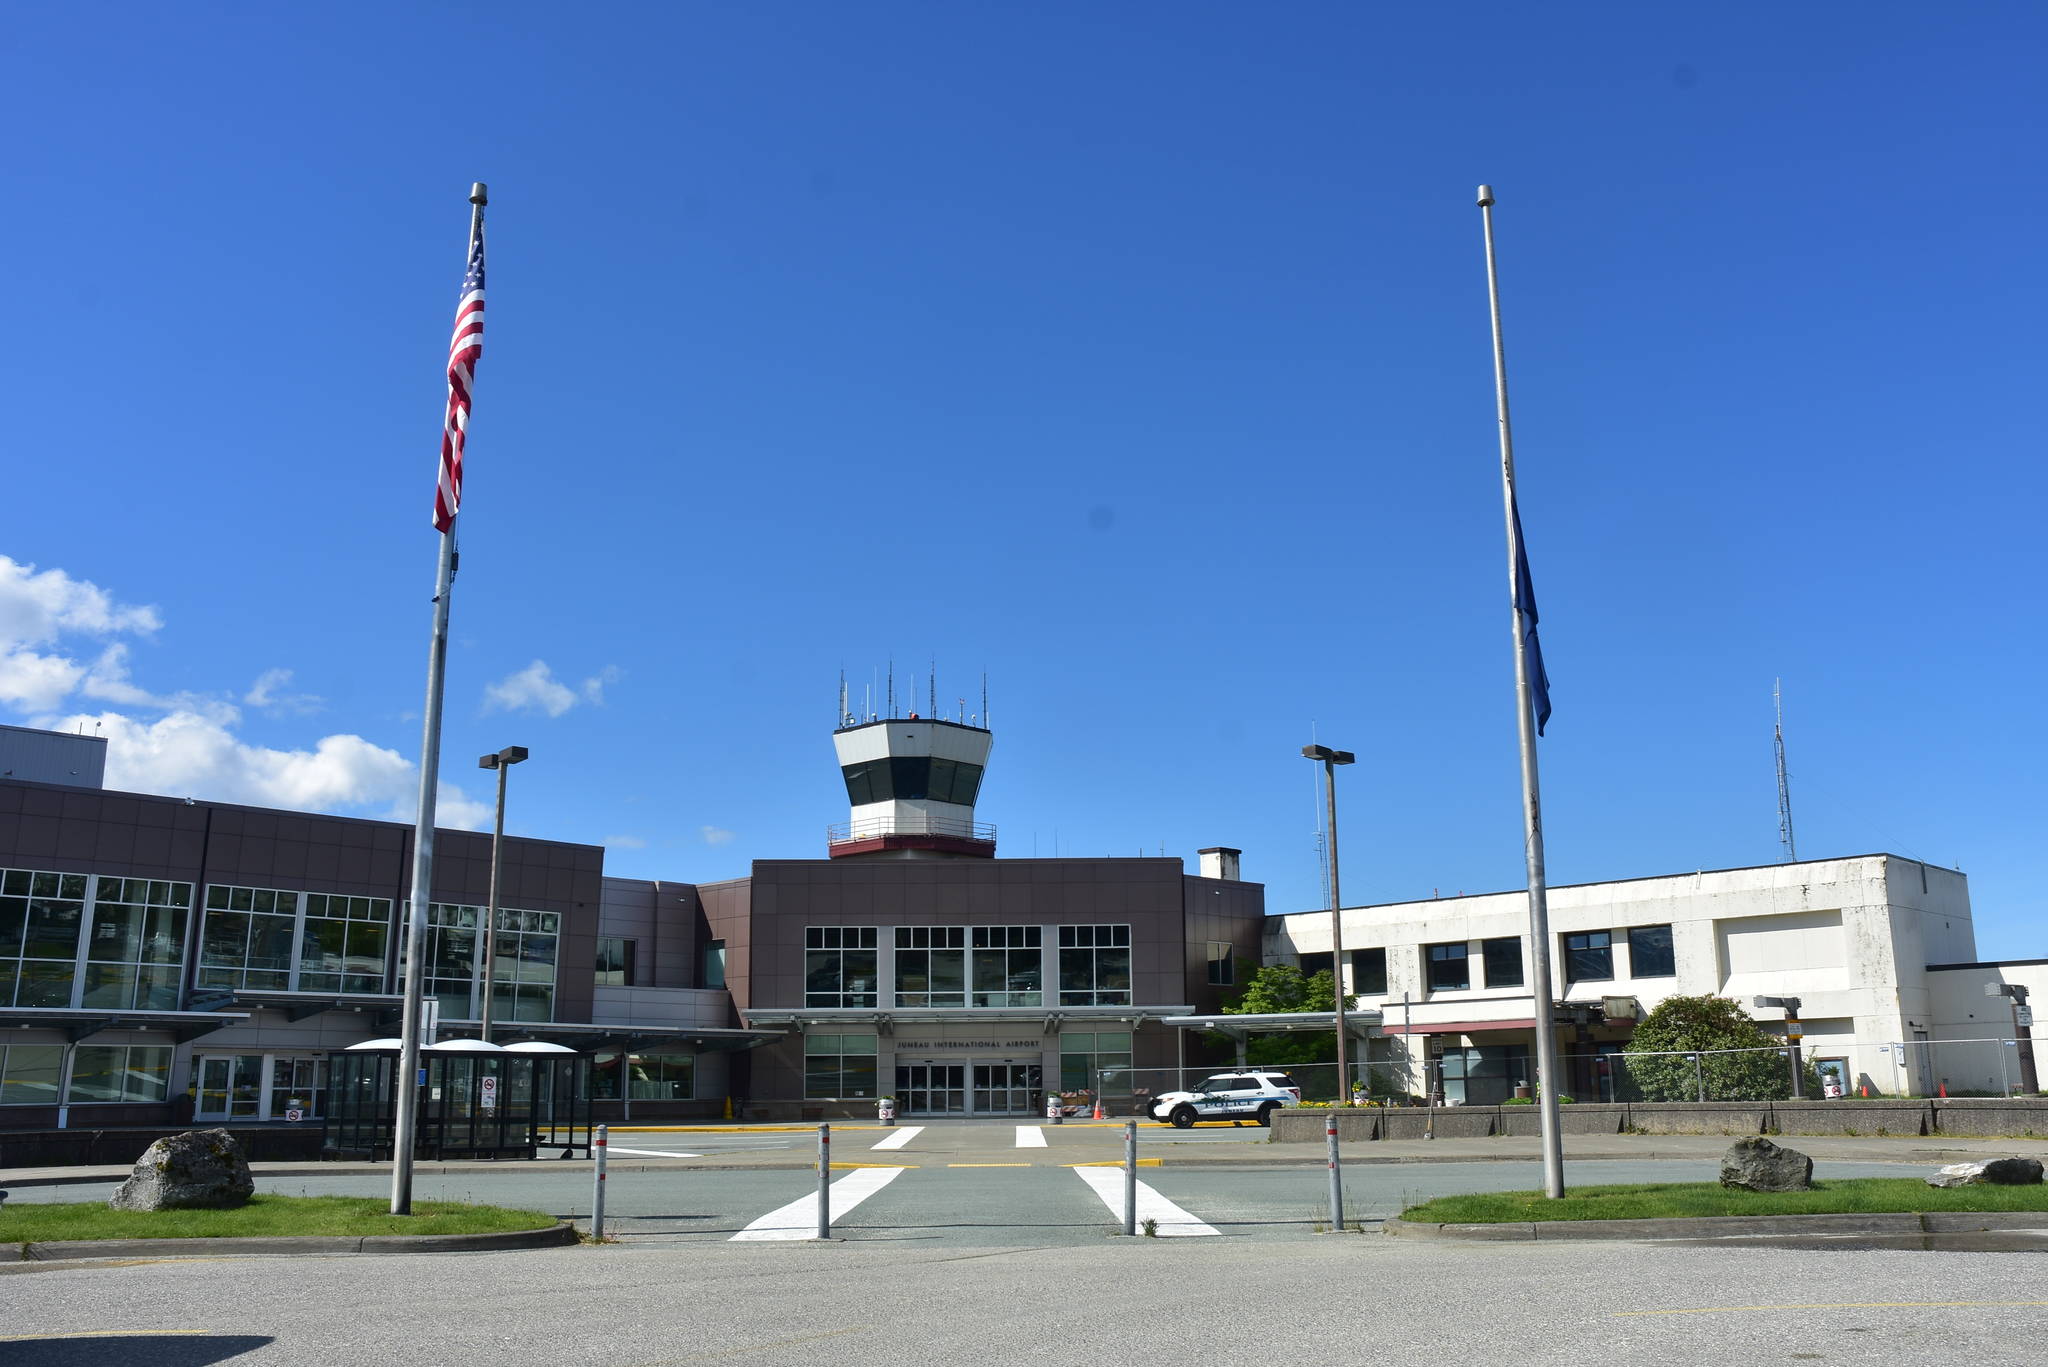 A traveler not from Alaska tested for COVID-19 at Juneau International Airport has tested positive. (Peter Segall | Juneau Empire)